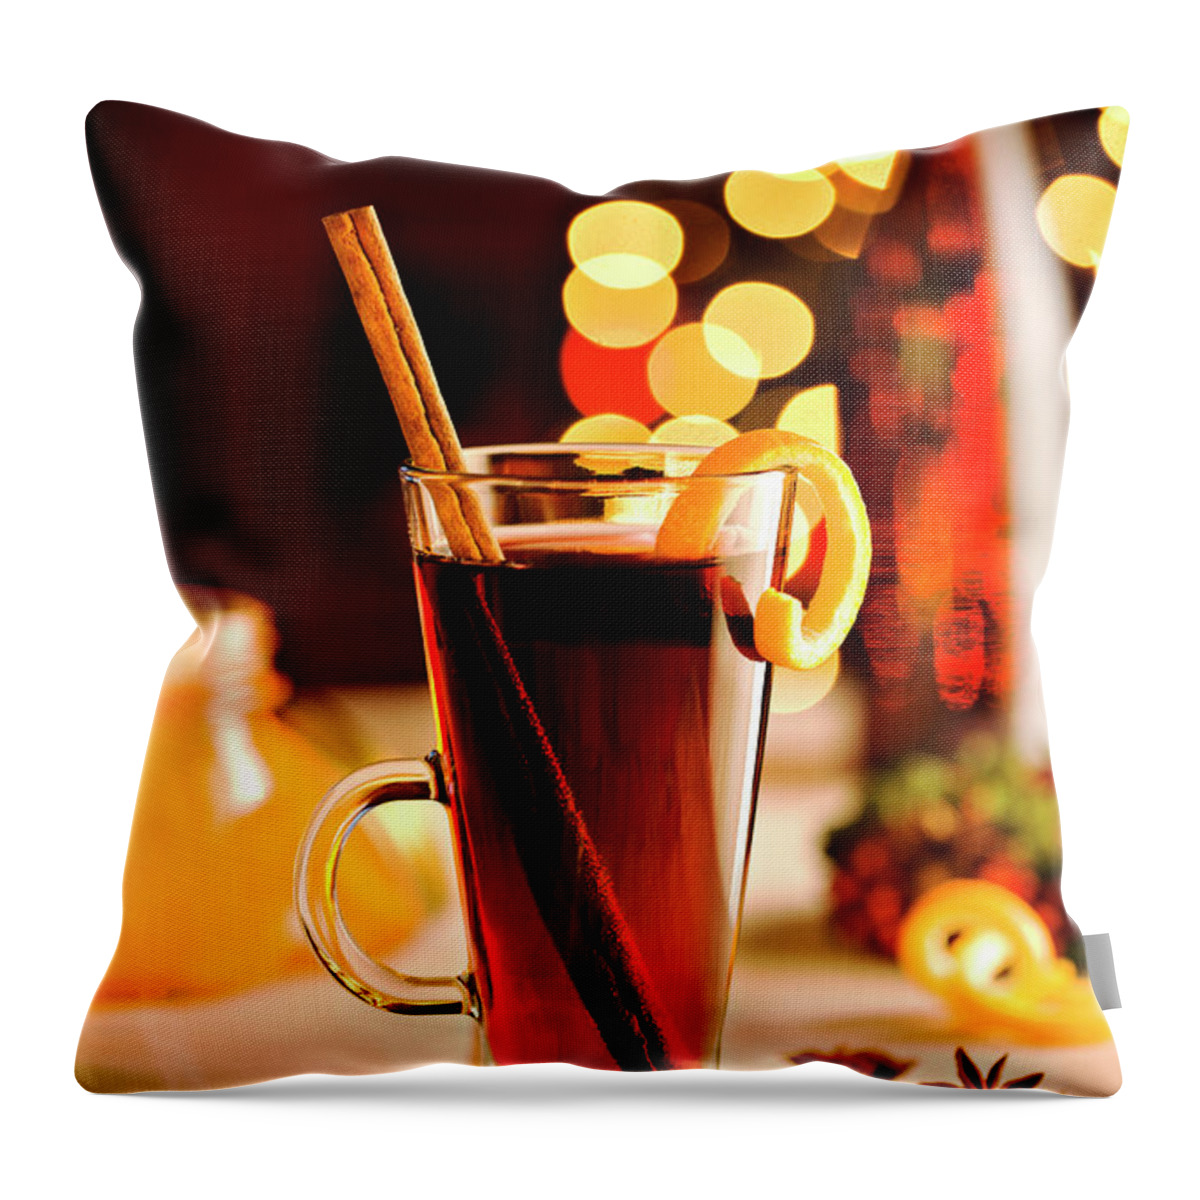 Orange Color Throw Pillow featuring the photograph Hot Wine by Azemdega